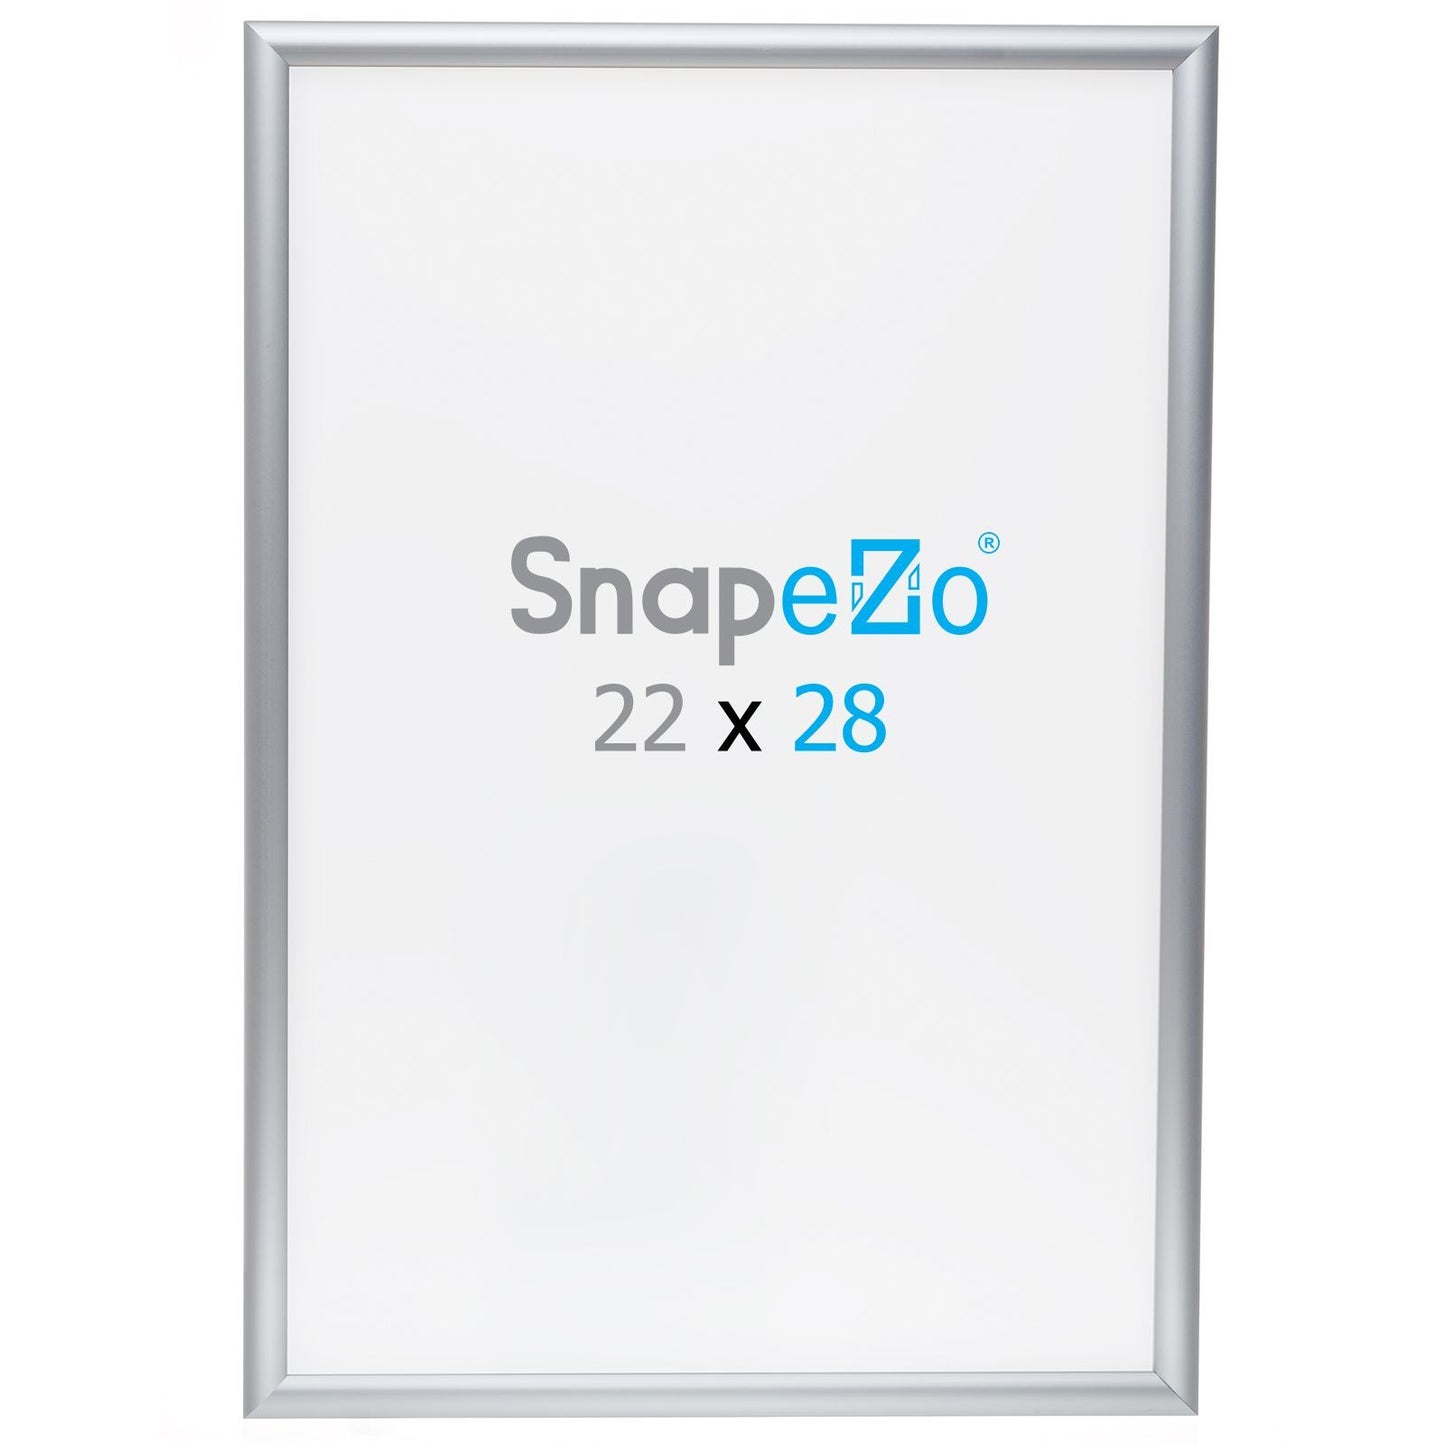 Load image into Gallery viewer, Brushed silver SnapeZo® snap frame poster size 22X28 - 1 inch profile
